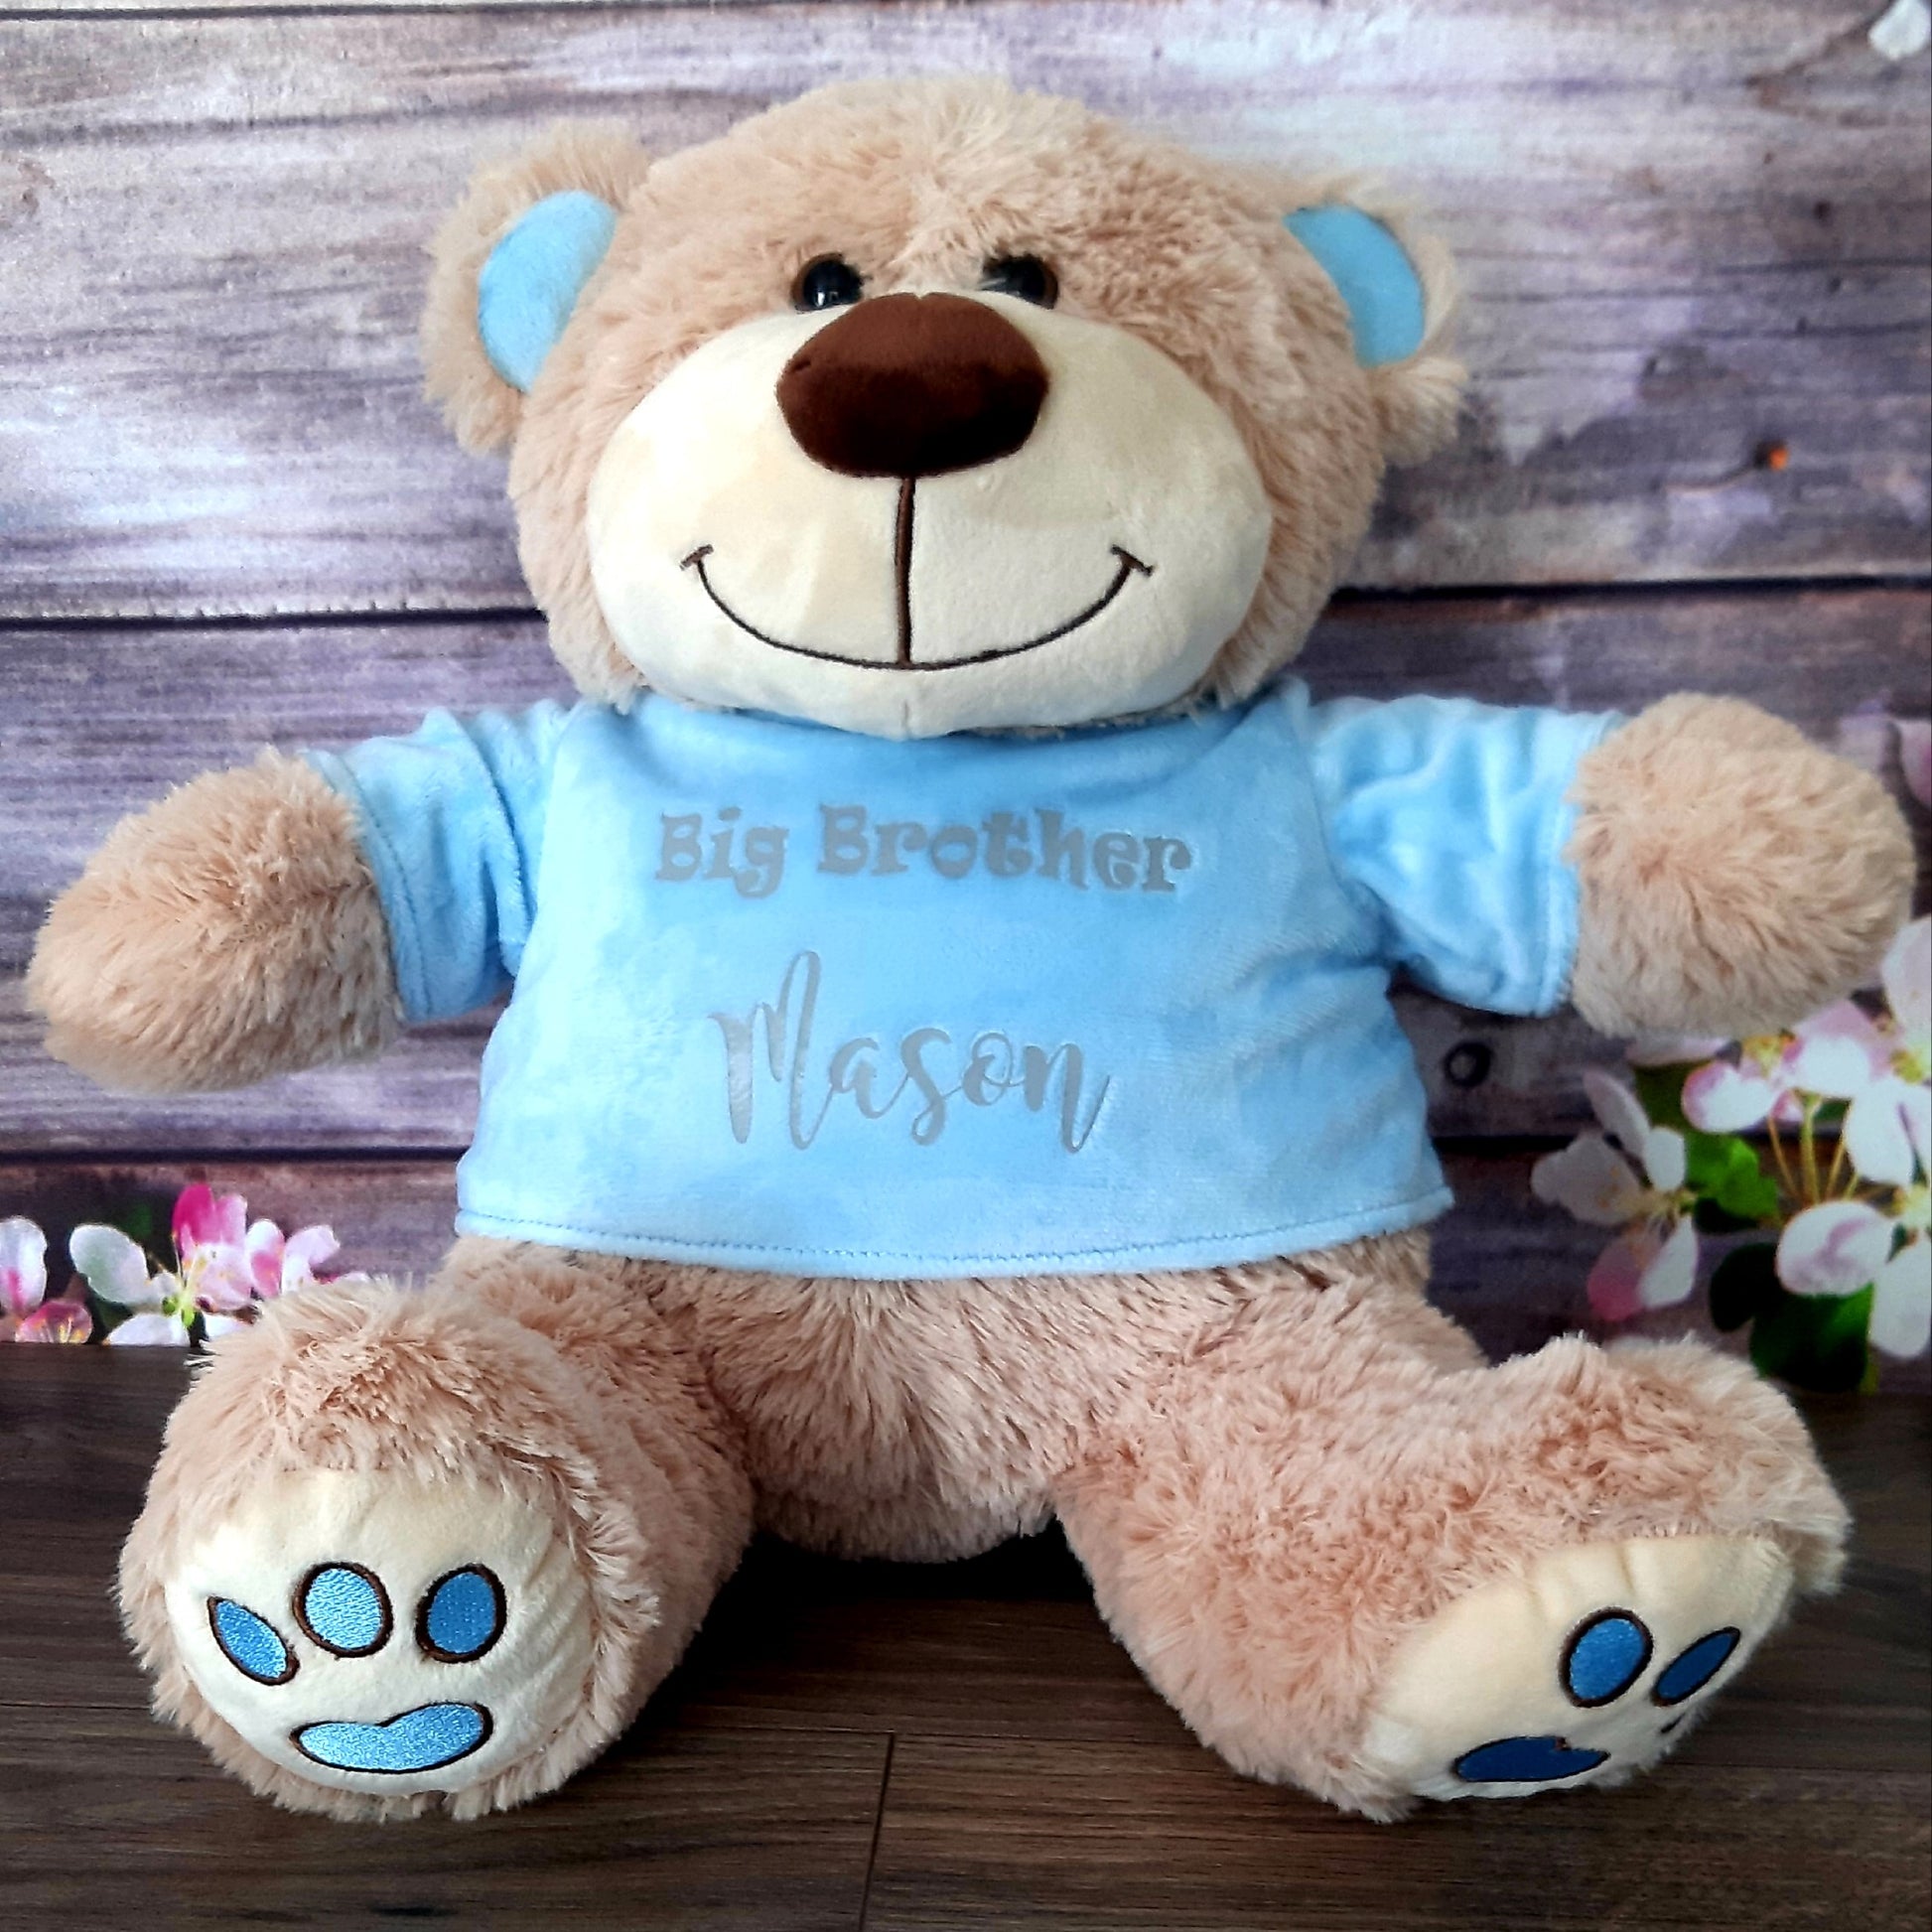 large personalised t shirt teddy bear with blue or pink t shirt. Persoanlised with child's name or can be done with a message such as flowergirl or pageboy proposals. 